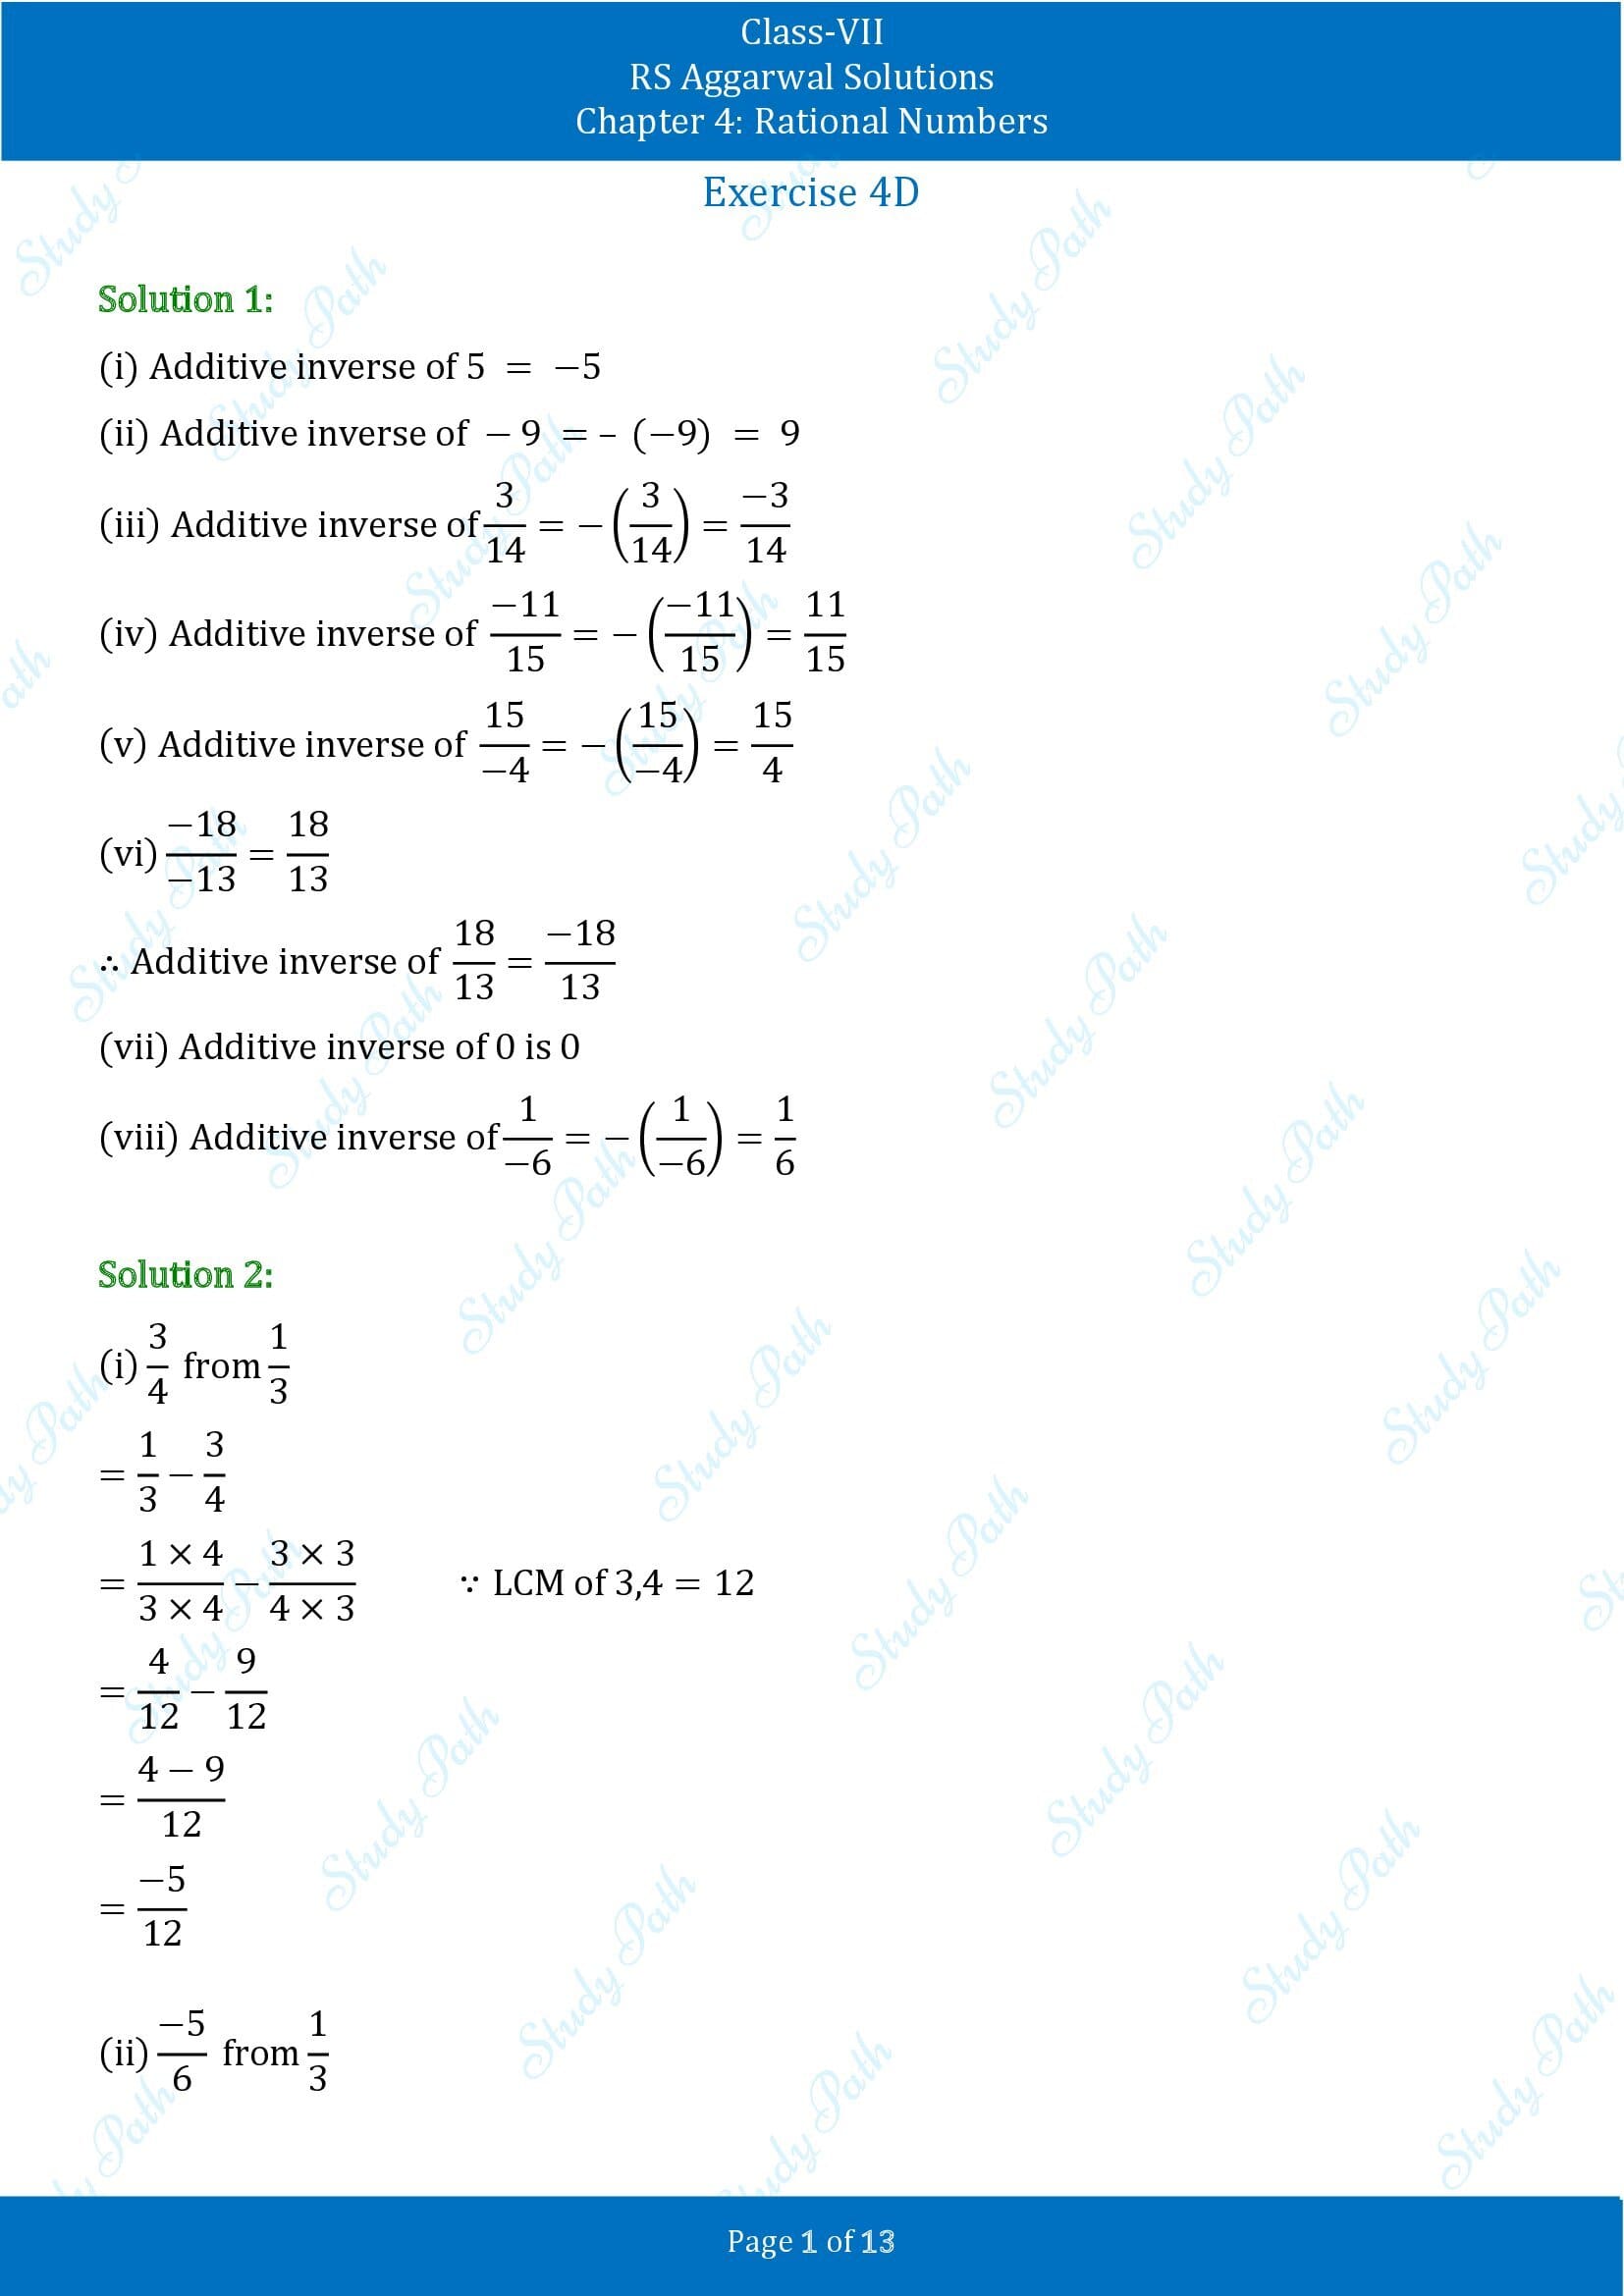 RS Aggarwal Solutions Class 7 Chapter 4 Rational Numbers Exercise 4D 00001